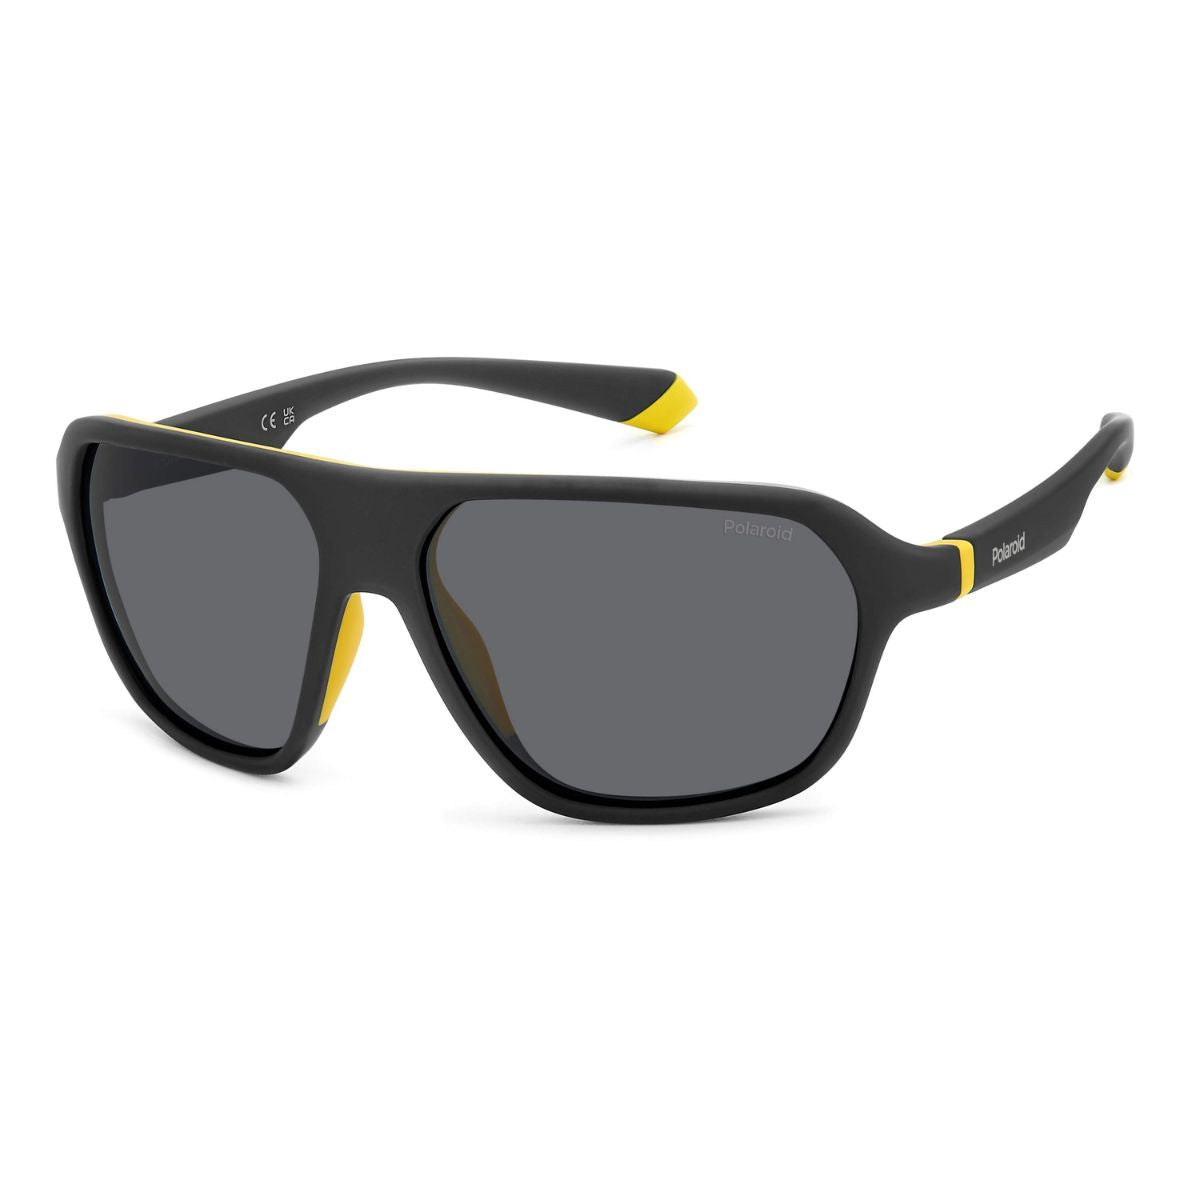 "Buy Trendy Rectangle Polarized Sunglasses From Polaroid Collection At Optorium"